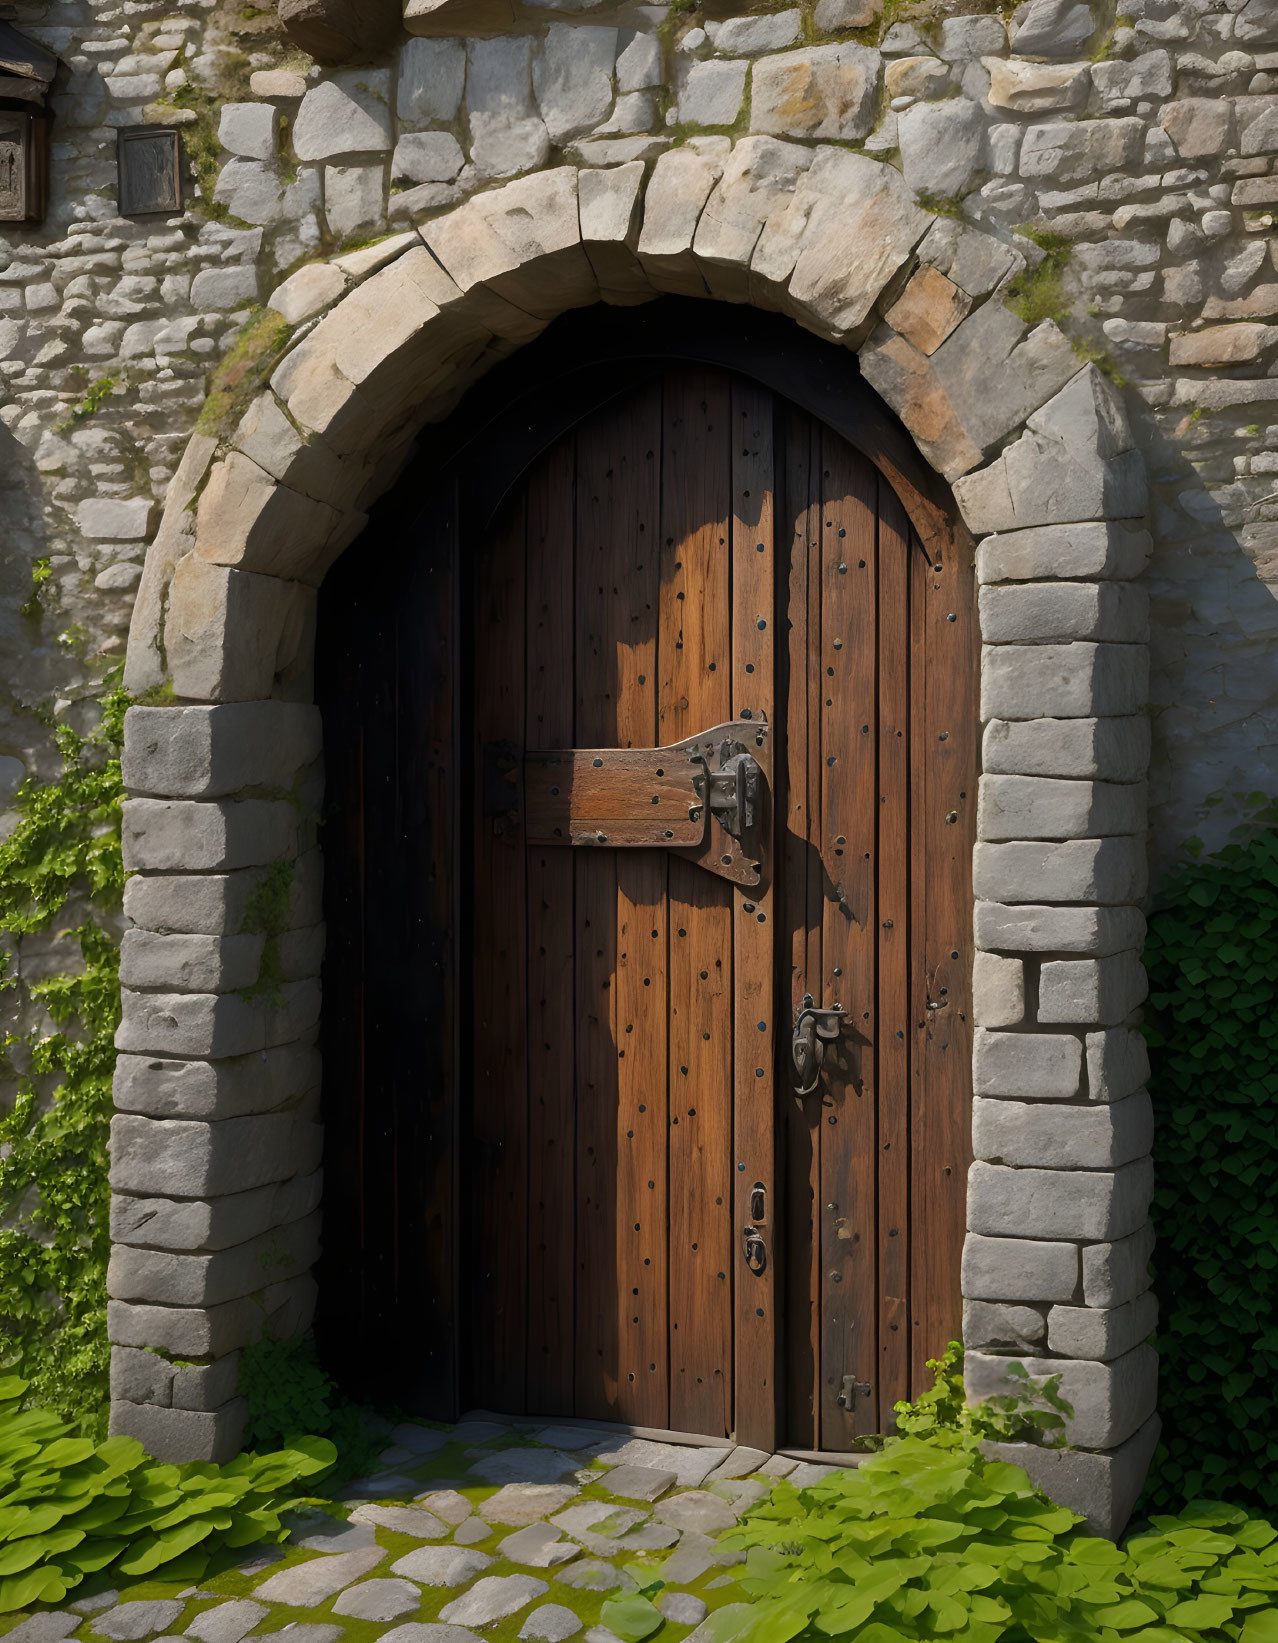 Wooden arched door in stone wall slightly ajar in serene, sunlit setting